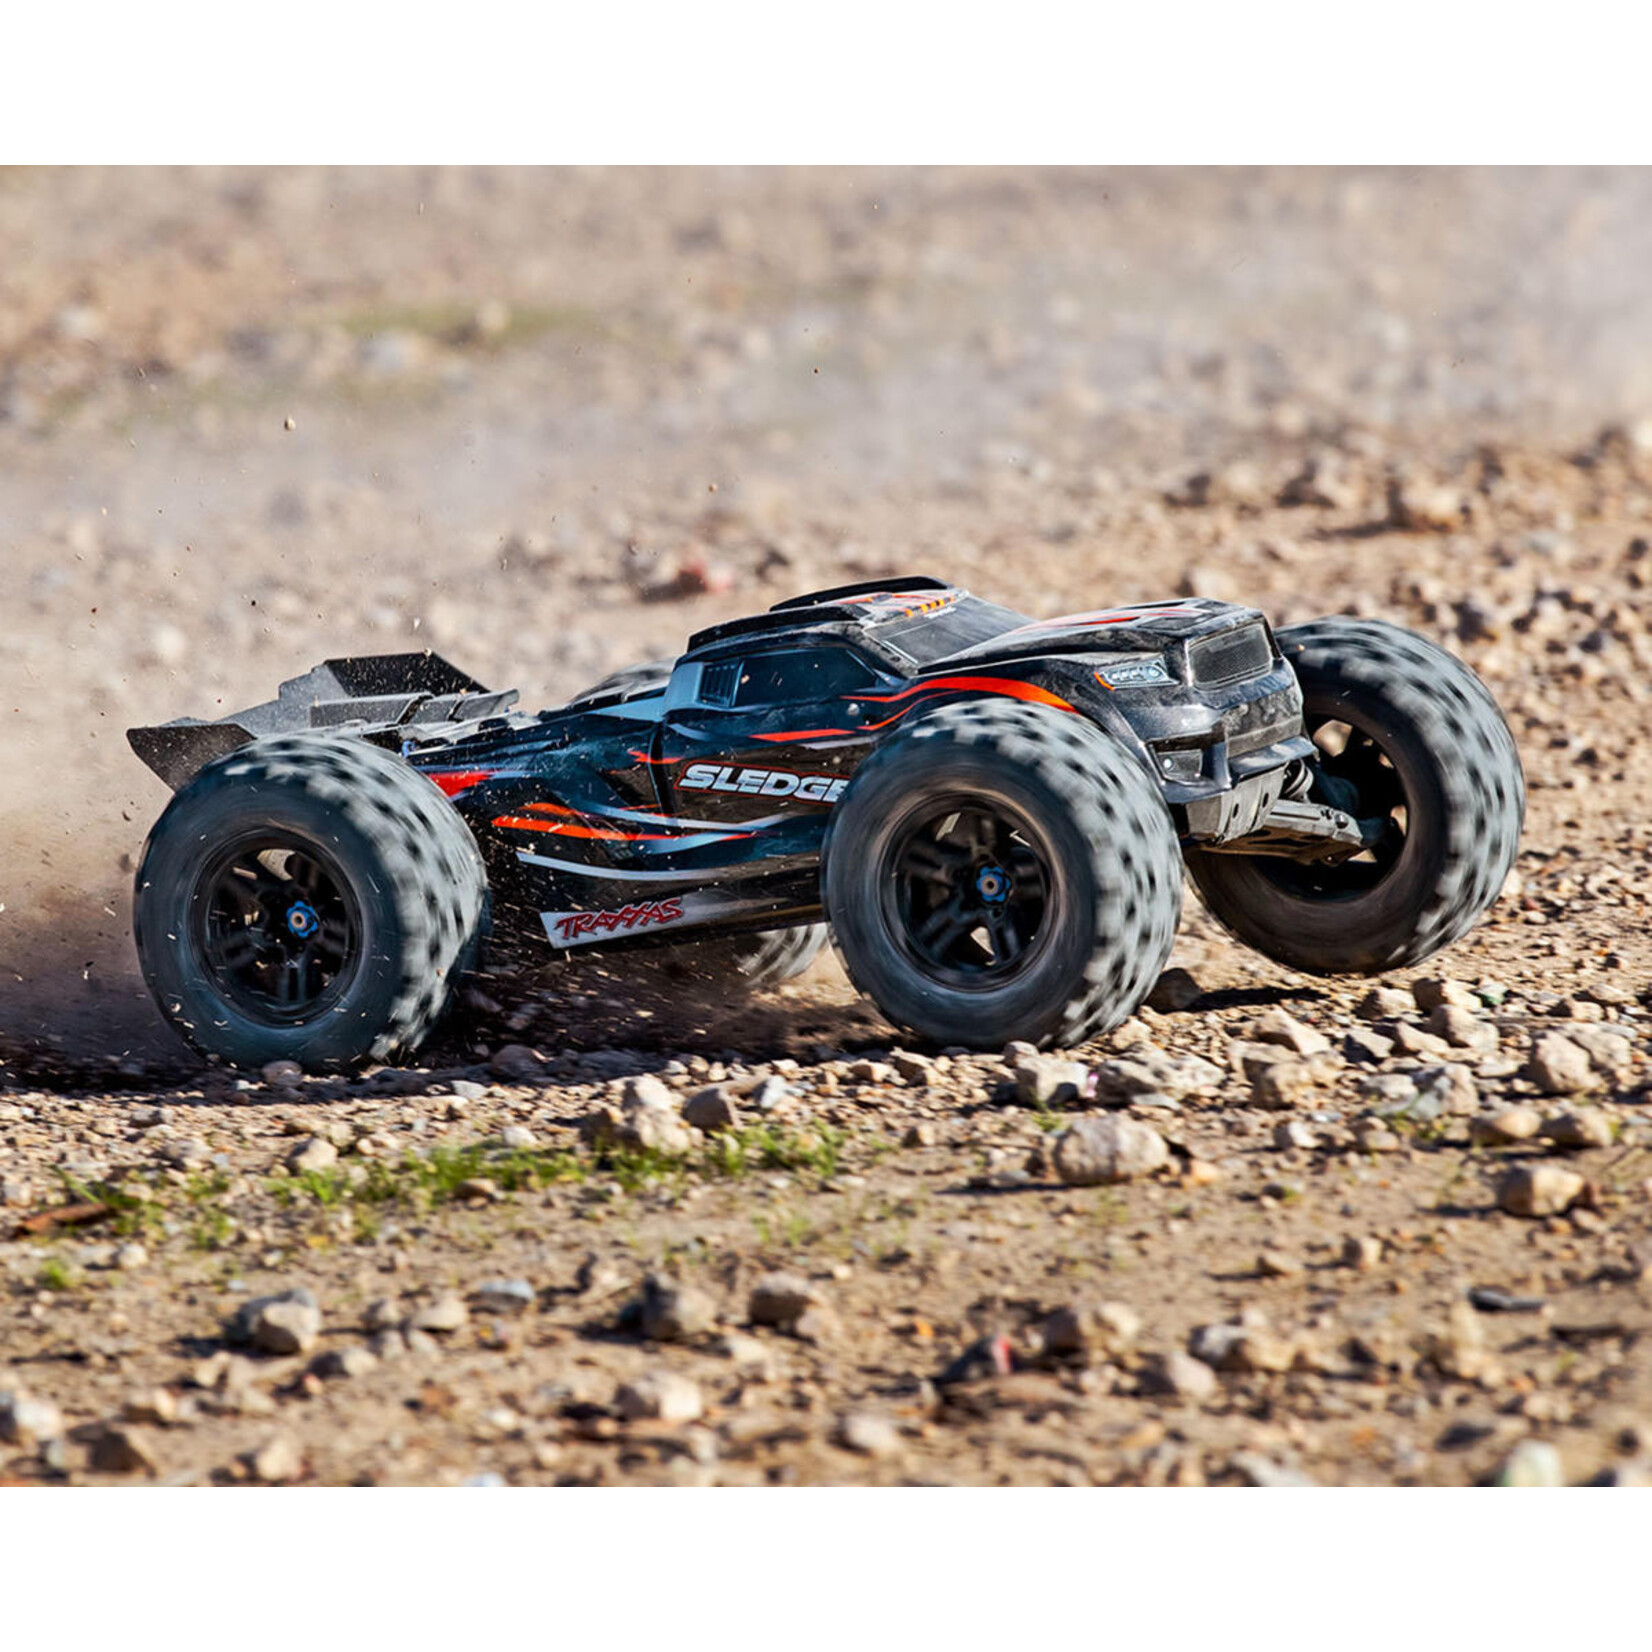 Traxxas Traxxas Sledge RTR 6S 4WD Electric Monster Truck (Red) w/VXL-6s ESC & TQi 2.4GHz Radio #95076-4-RED